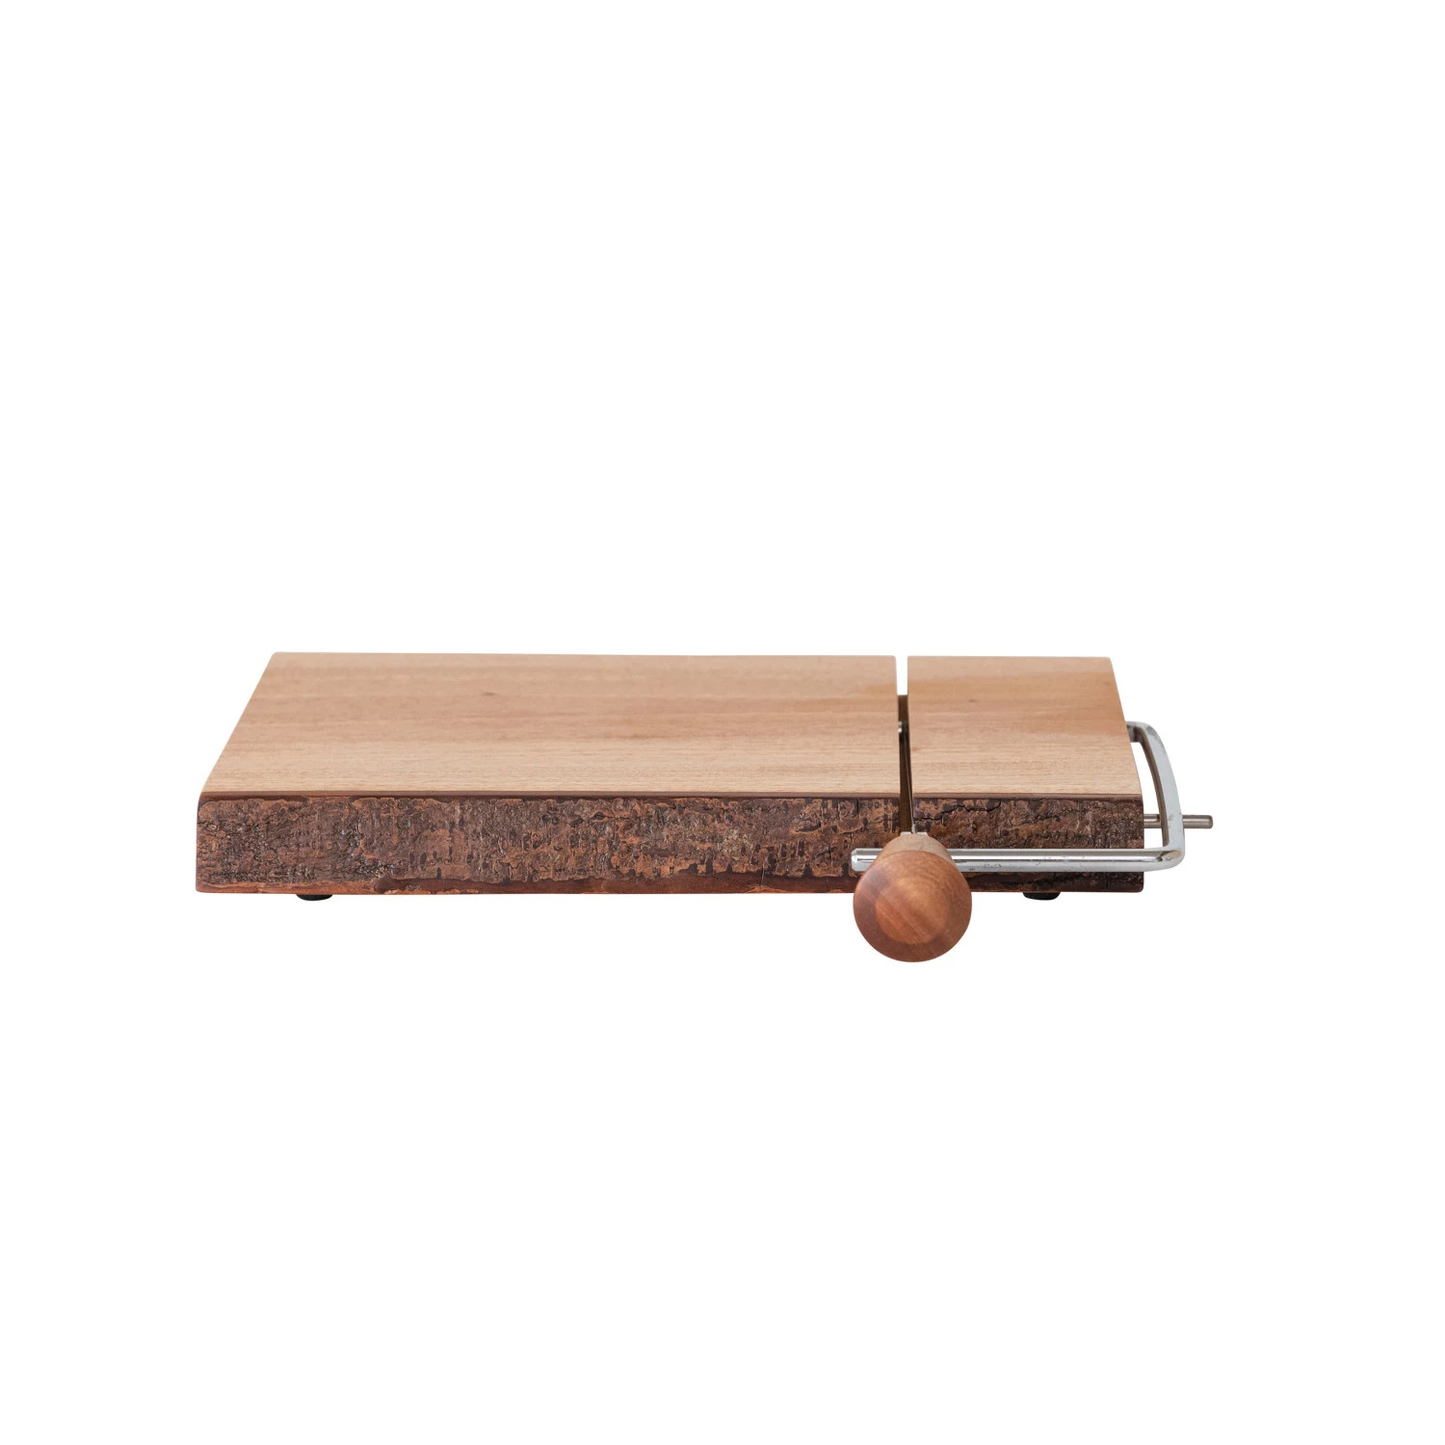 Mahogany Wood & Stainless Steel Cheese Slicer with Bark Edge